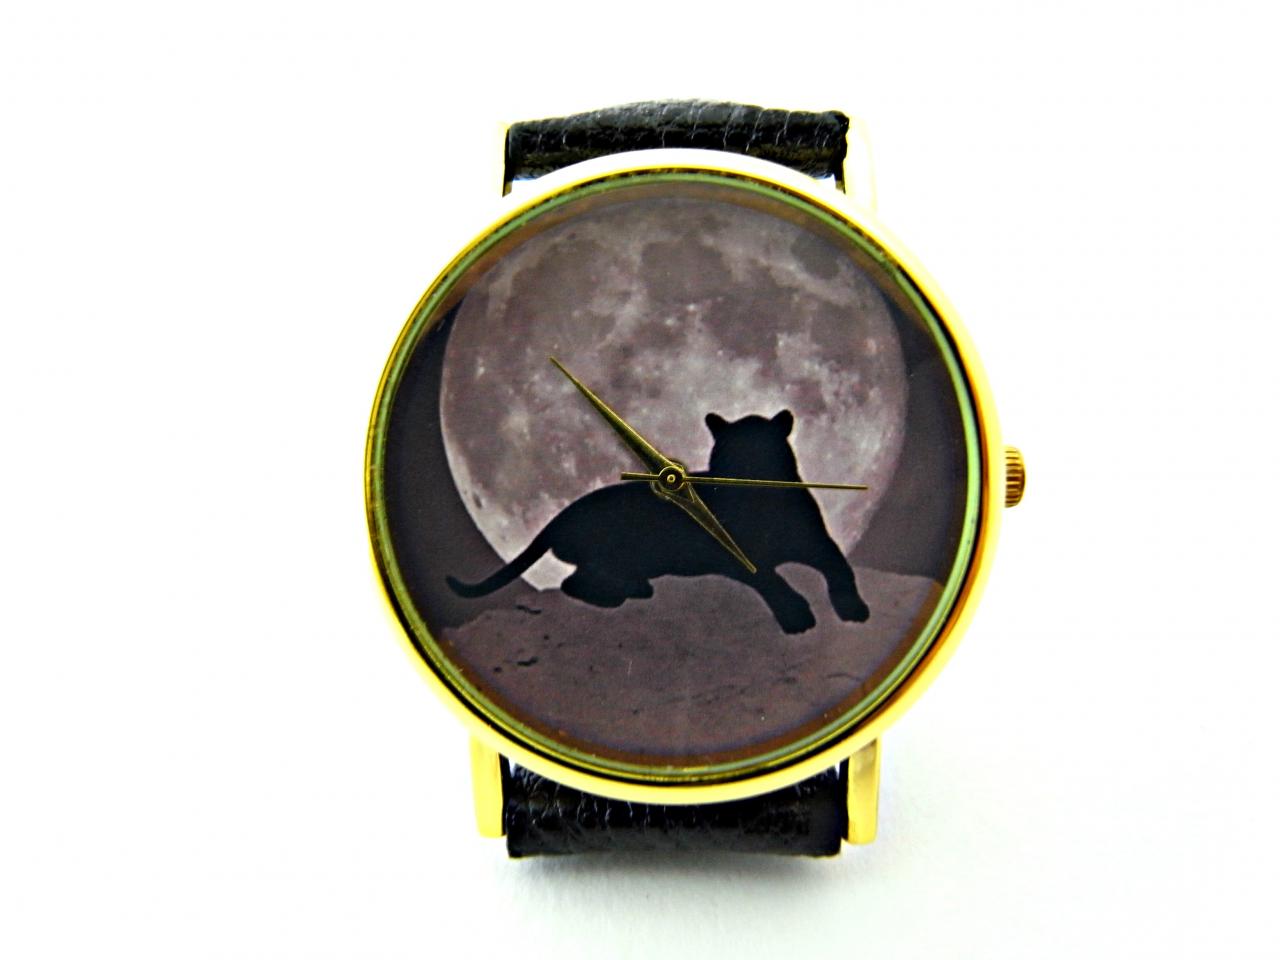 Tiger And Moon Leather Wrist Watches, Woman Man Lady Unisex Watch, Genuine Leather Handmade Unique Watch #51